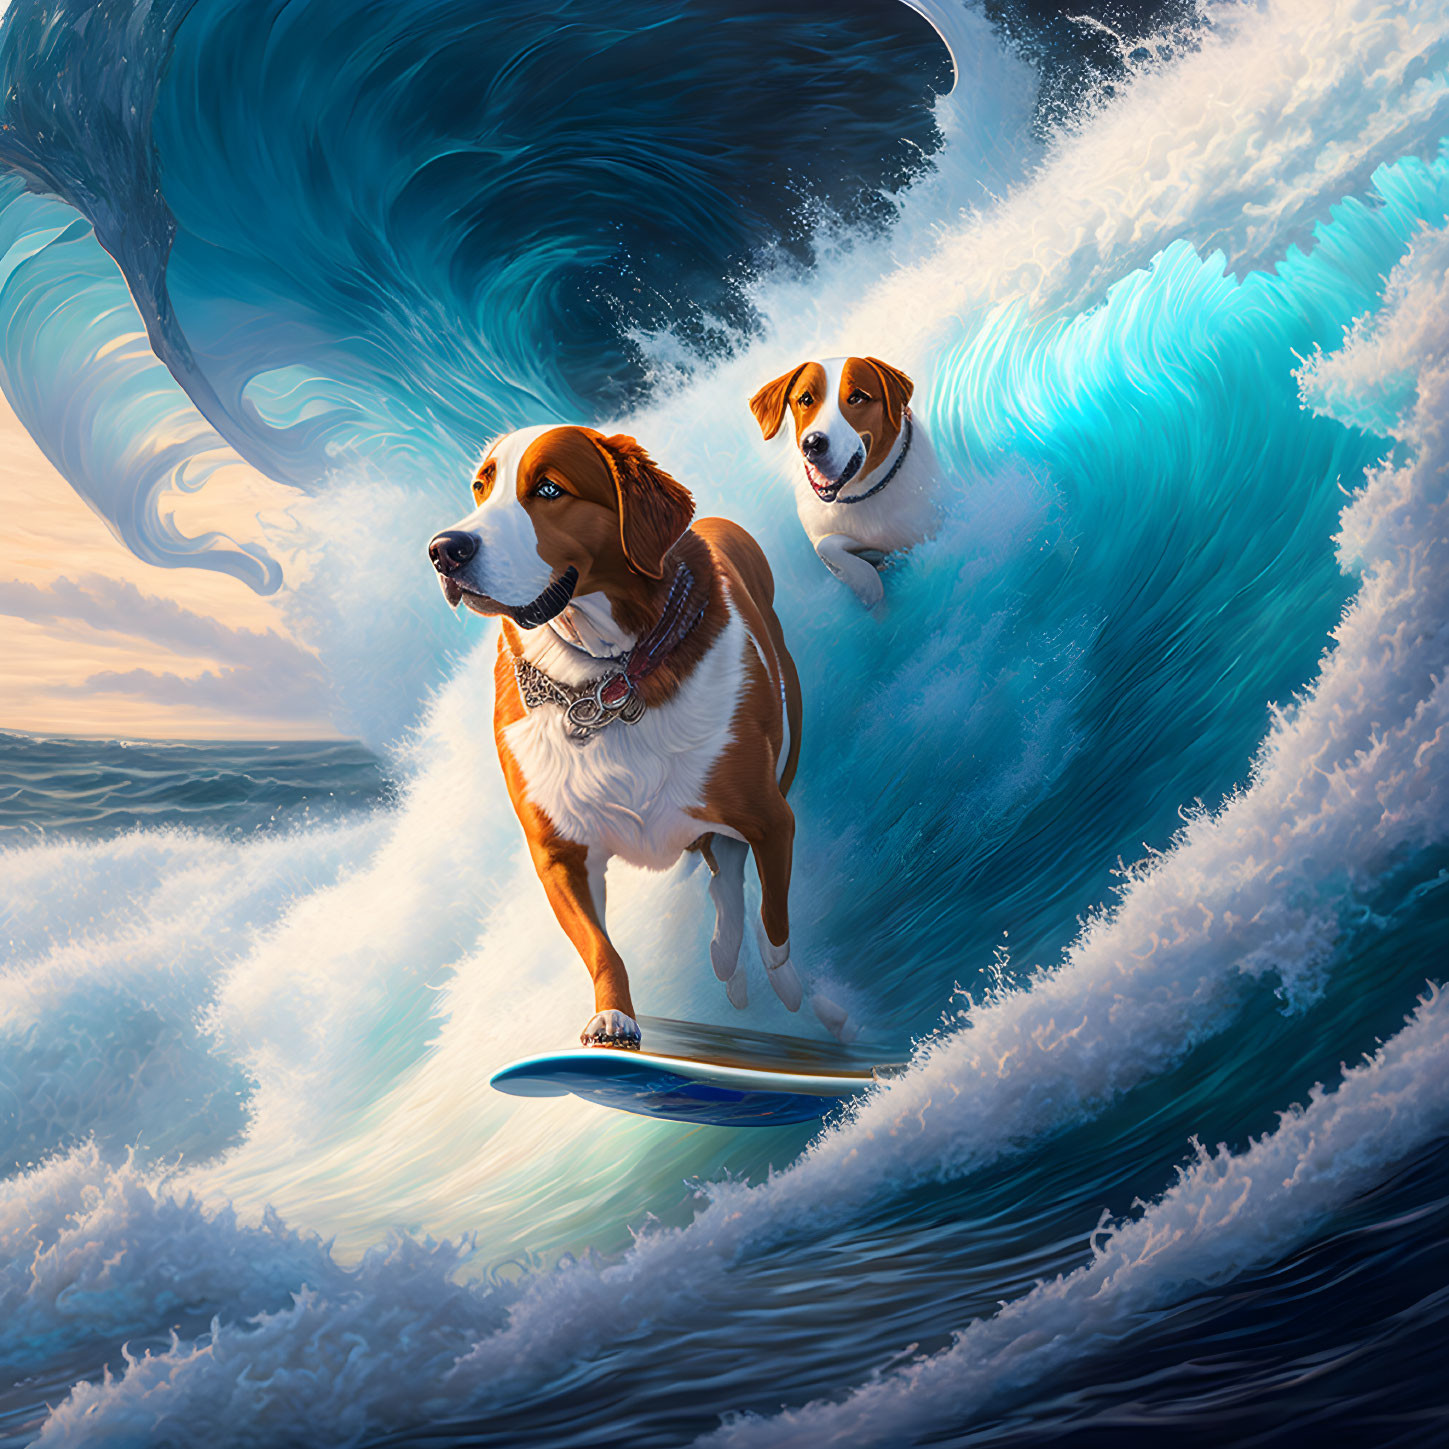 A dog surfing in a big wave